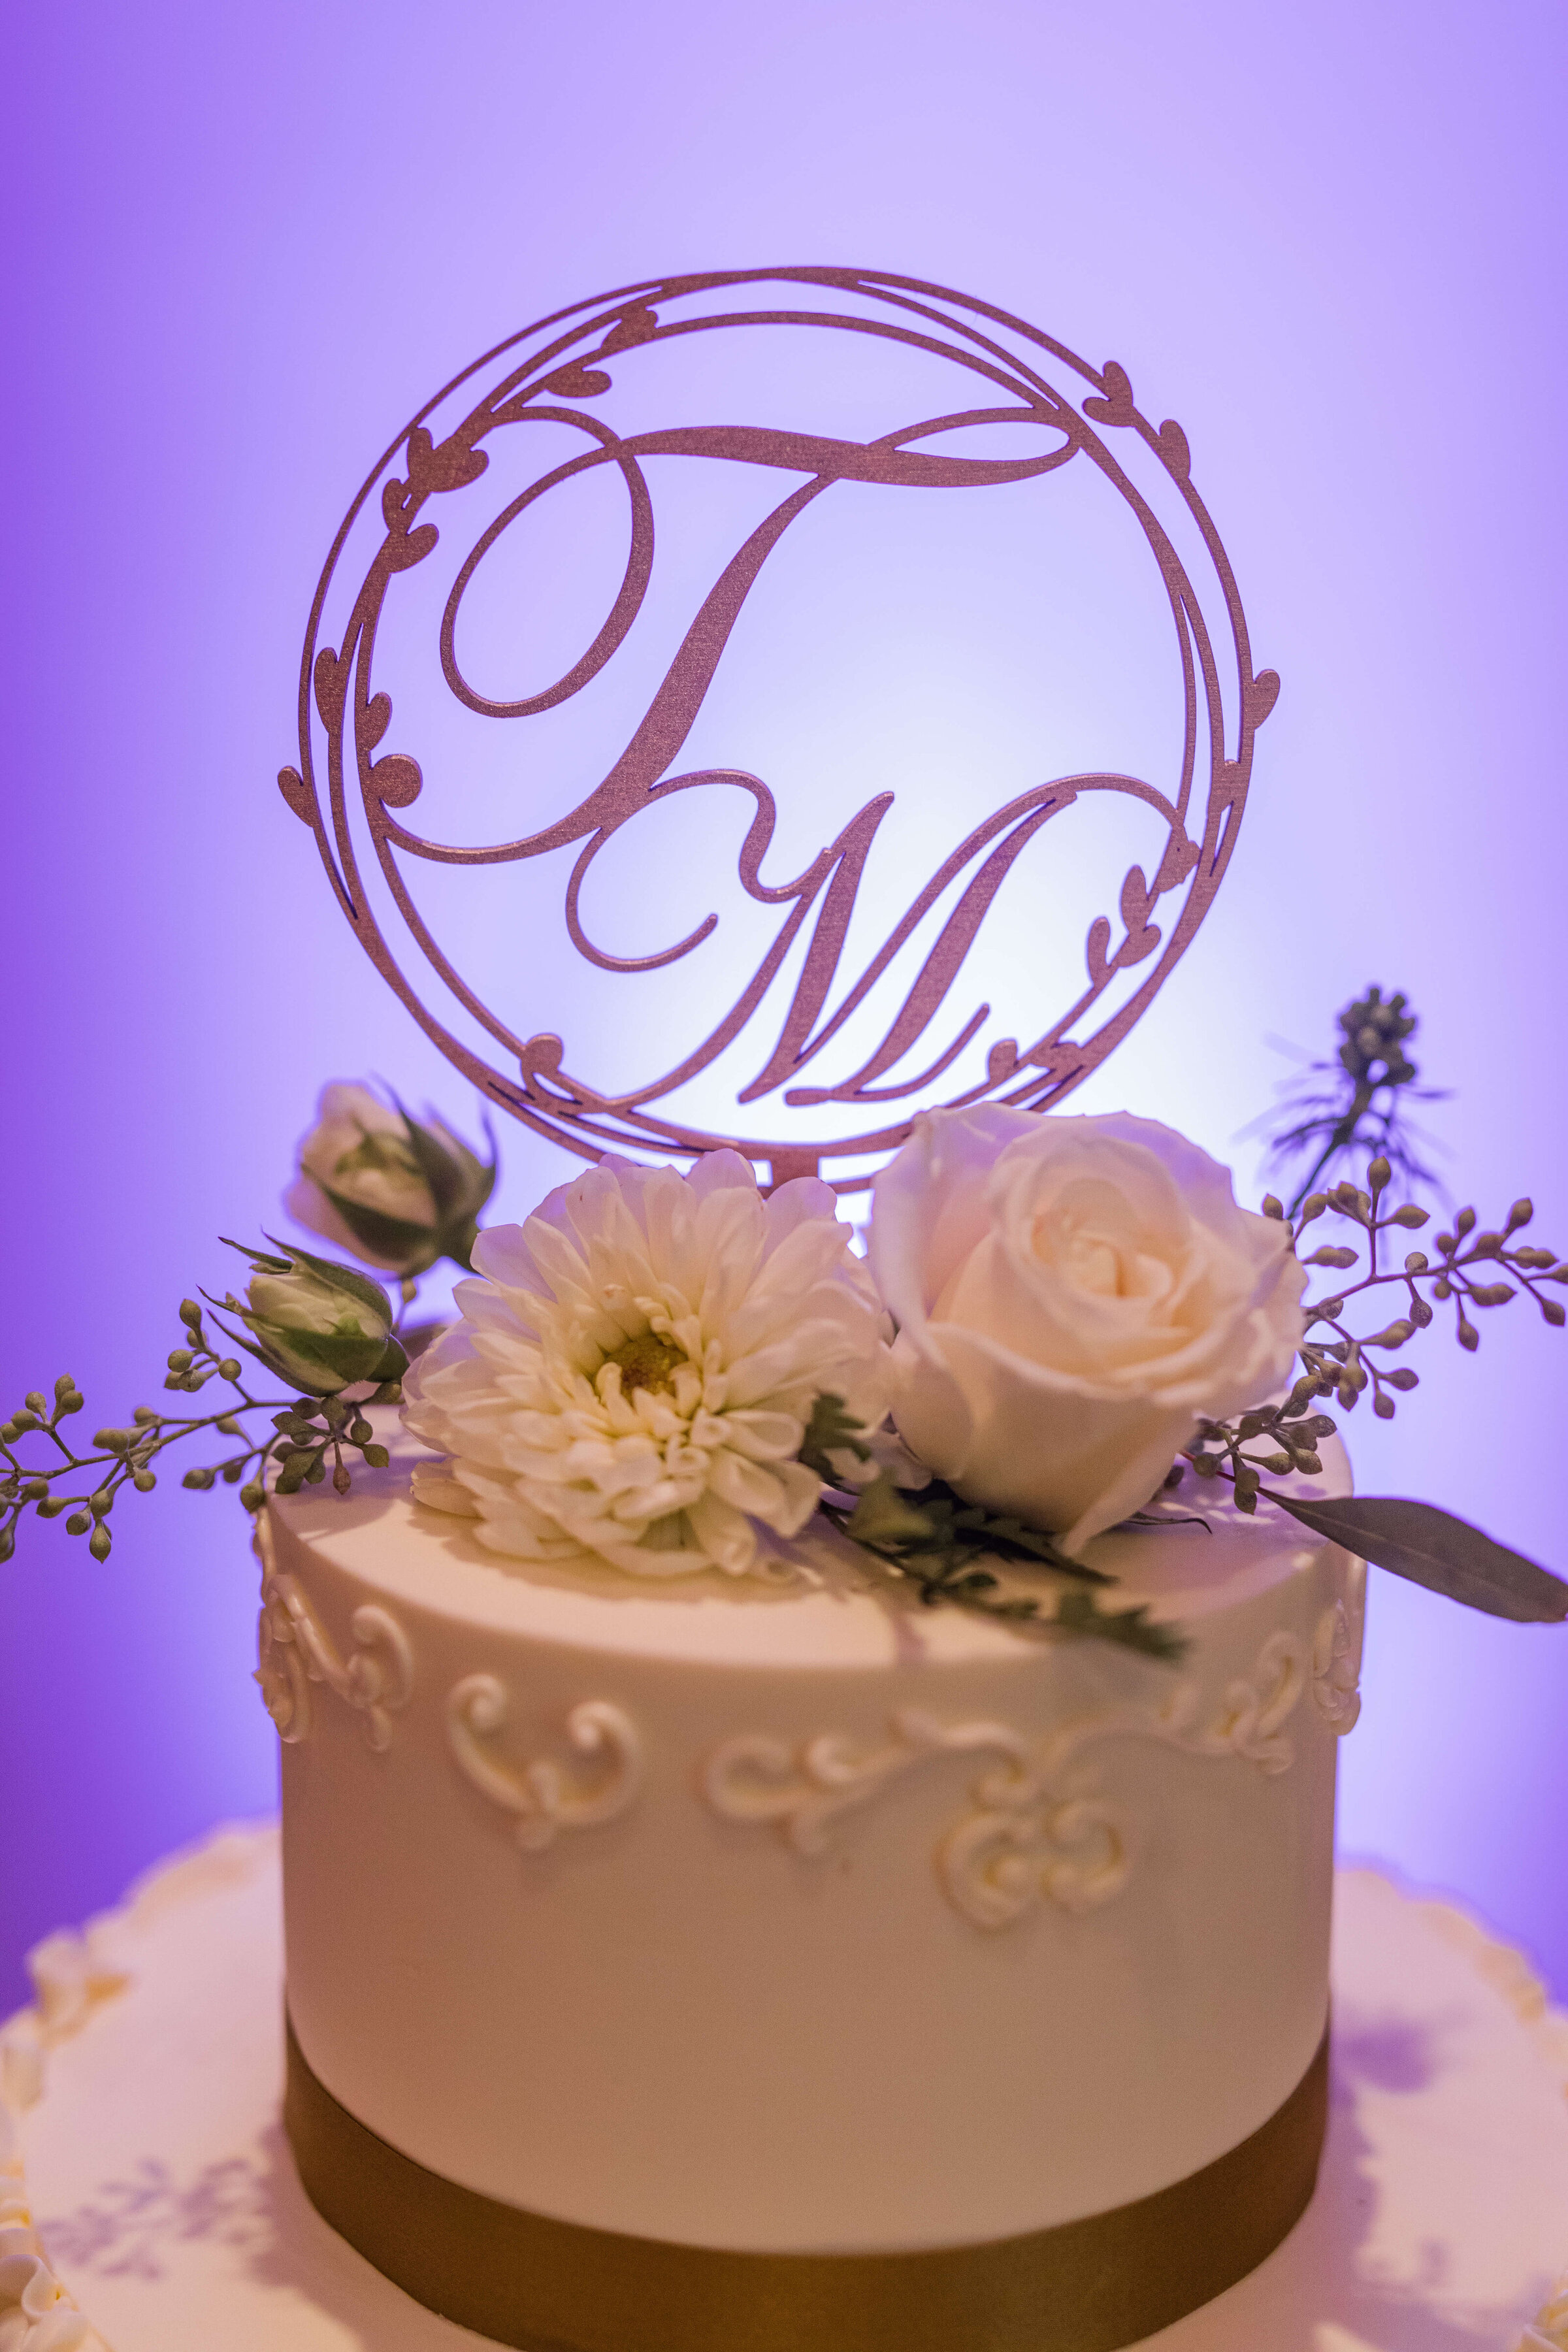 A wedding cake with a cake topper that has the initials T and M as the cake topper. There is a purple light behind it